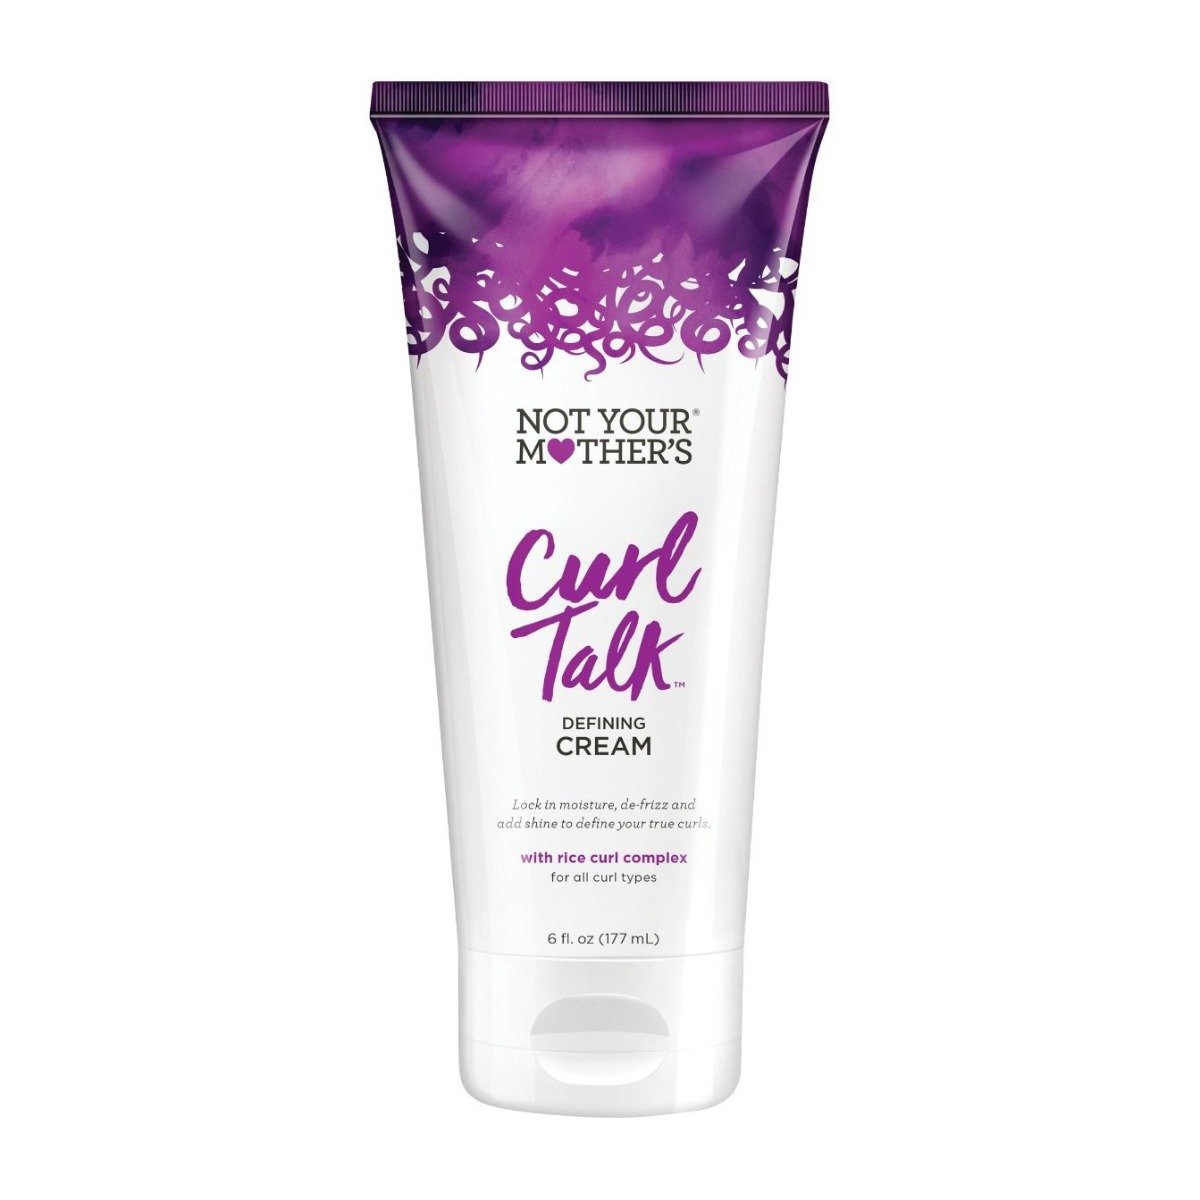 Not Your Mother's Curl Talk Curl Defining Cream - 177ml - Bloom Pharmacy